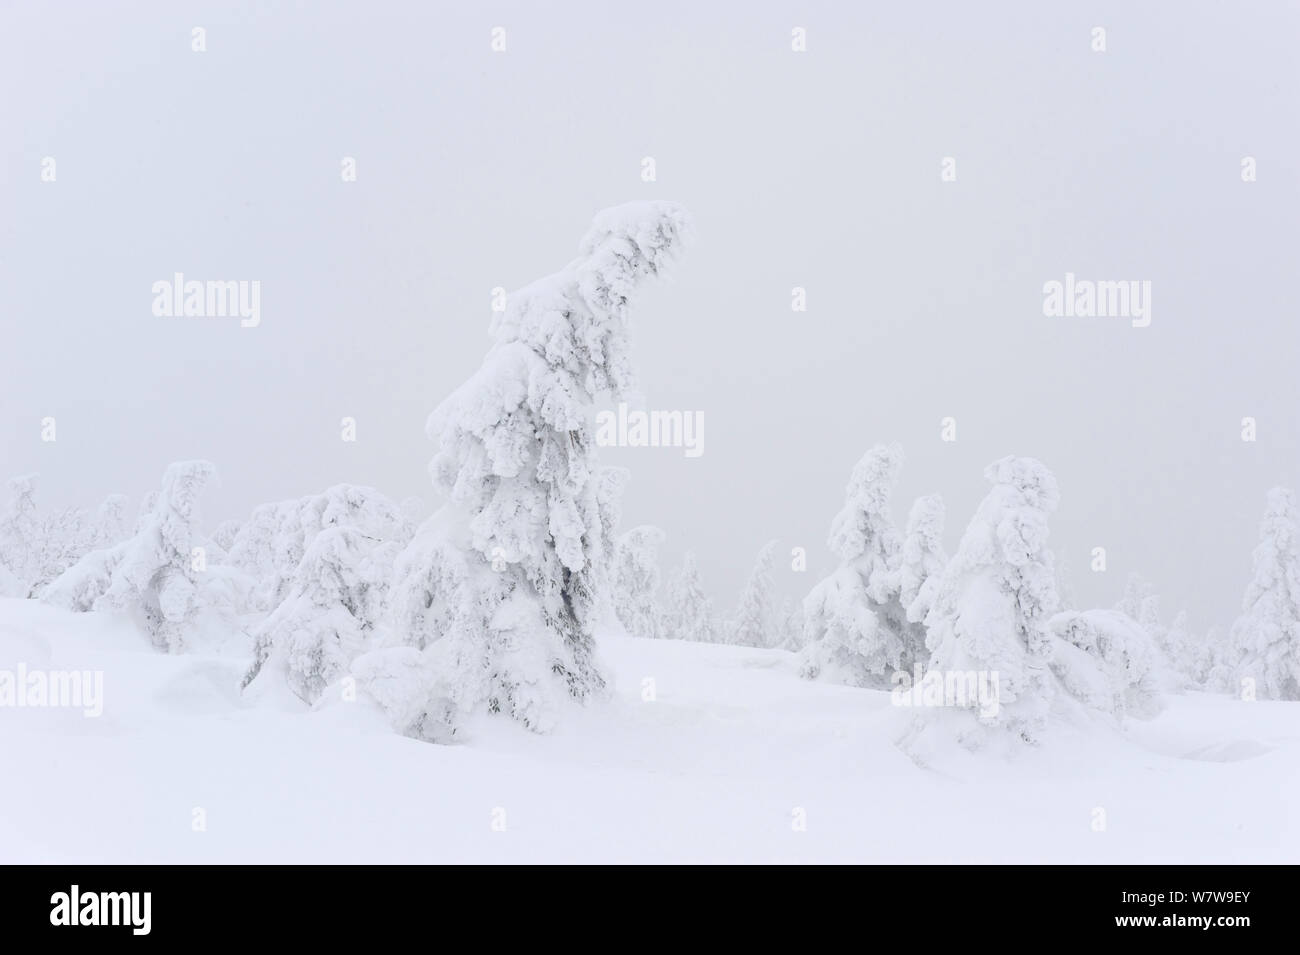 Norway spruce (Picea abies) trees covered in snow, Harz National Park, Brocken, Germany, February 2010. Stock Photo